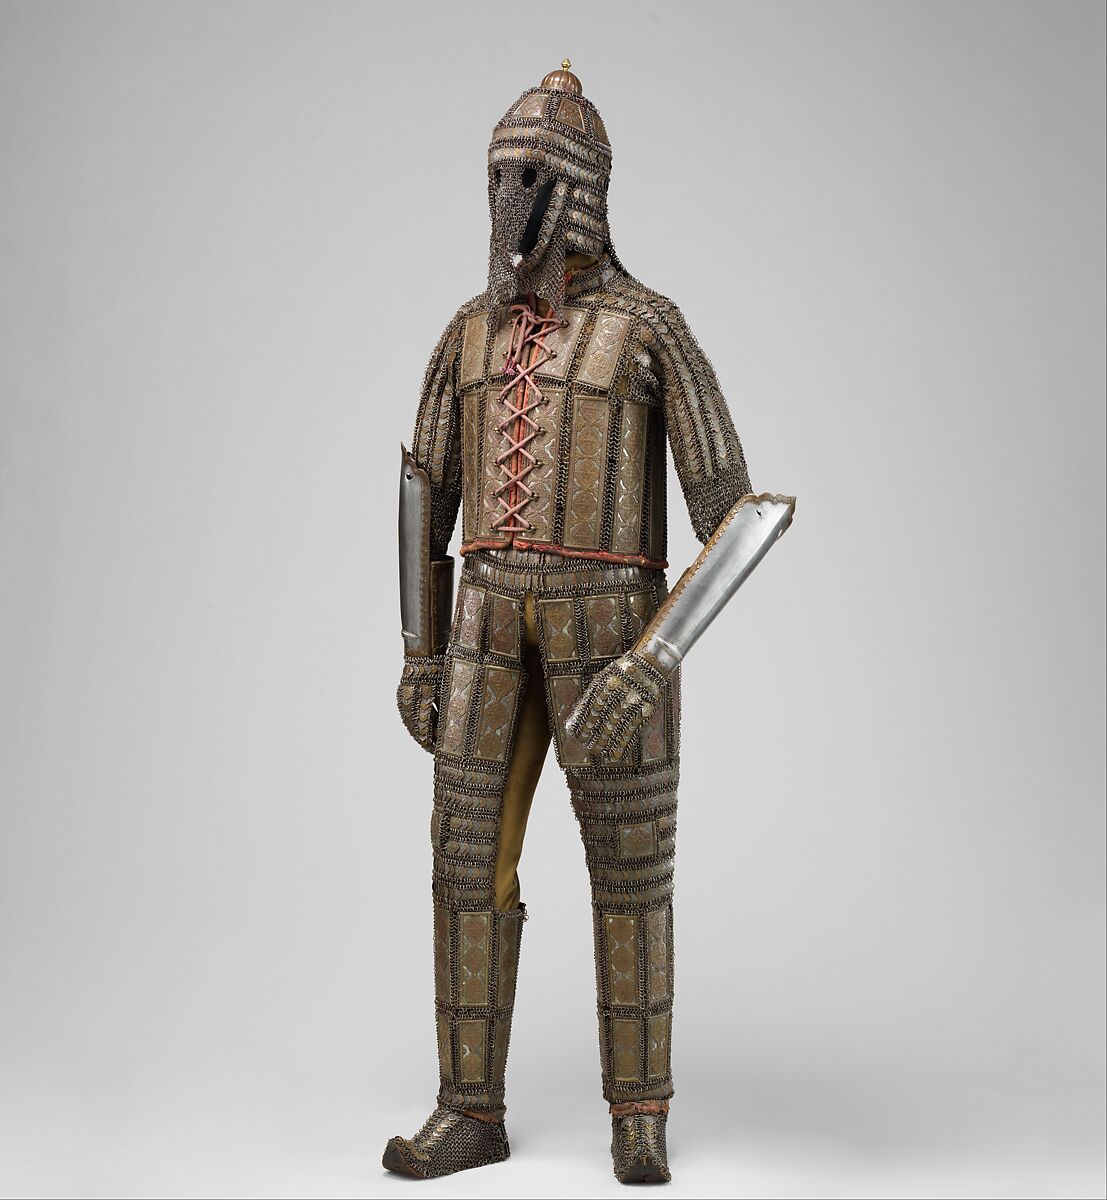 Armor of Mail and Plate, Steel, iron, copper alloy, textile, Indian, Sindh (now Pakistan) 